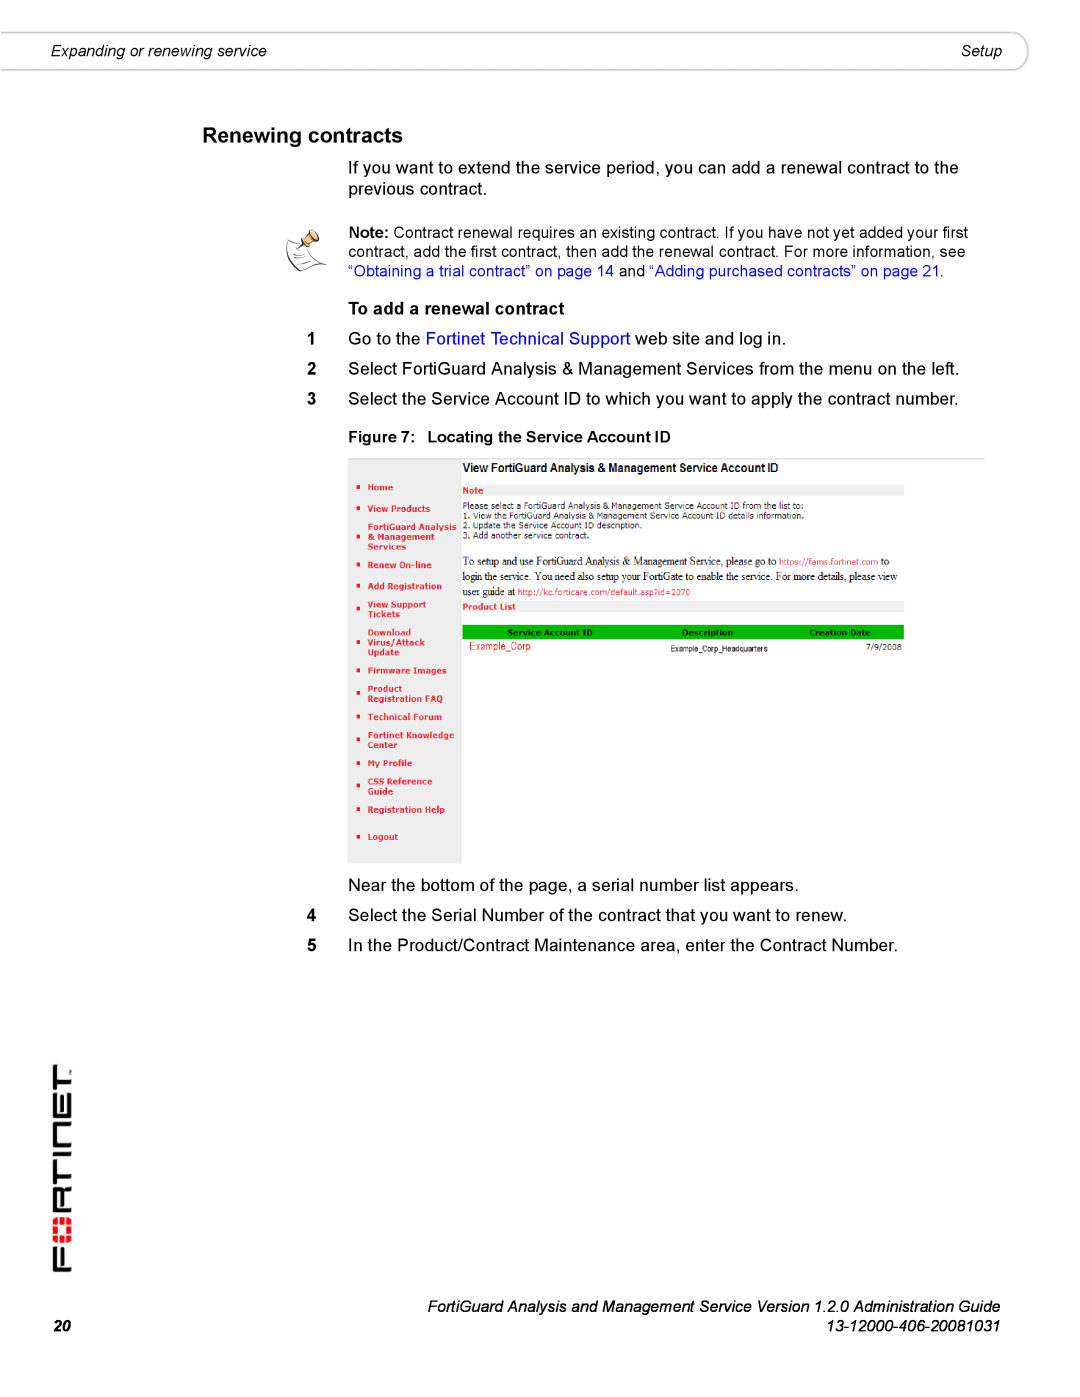 Fortinet 1.2.0 manual Renewing contracts, To add a renewal contract 